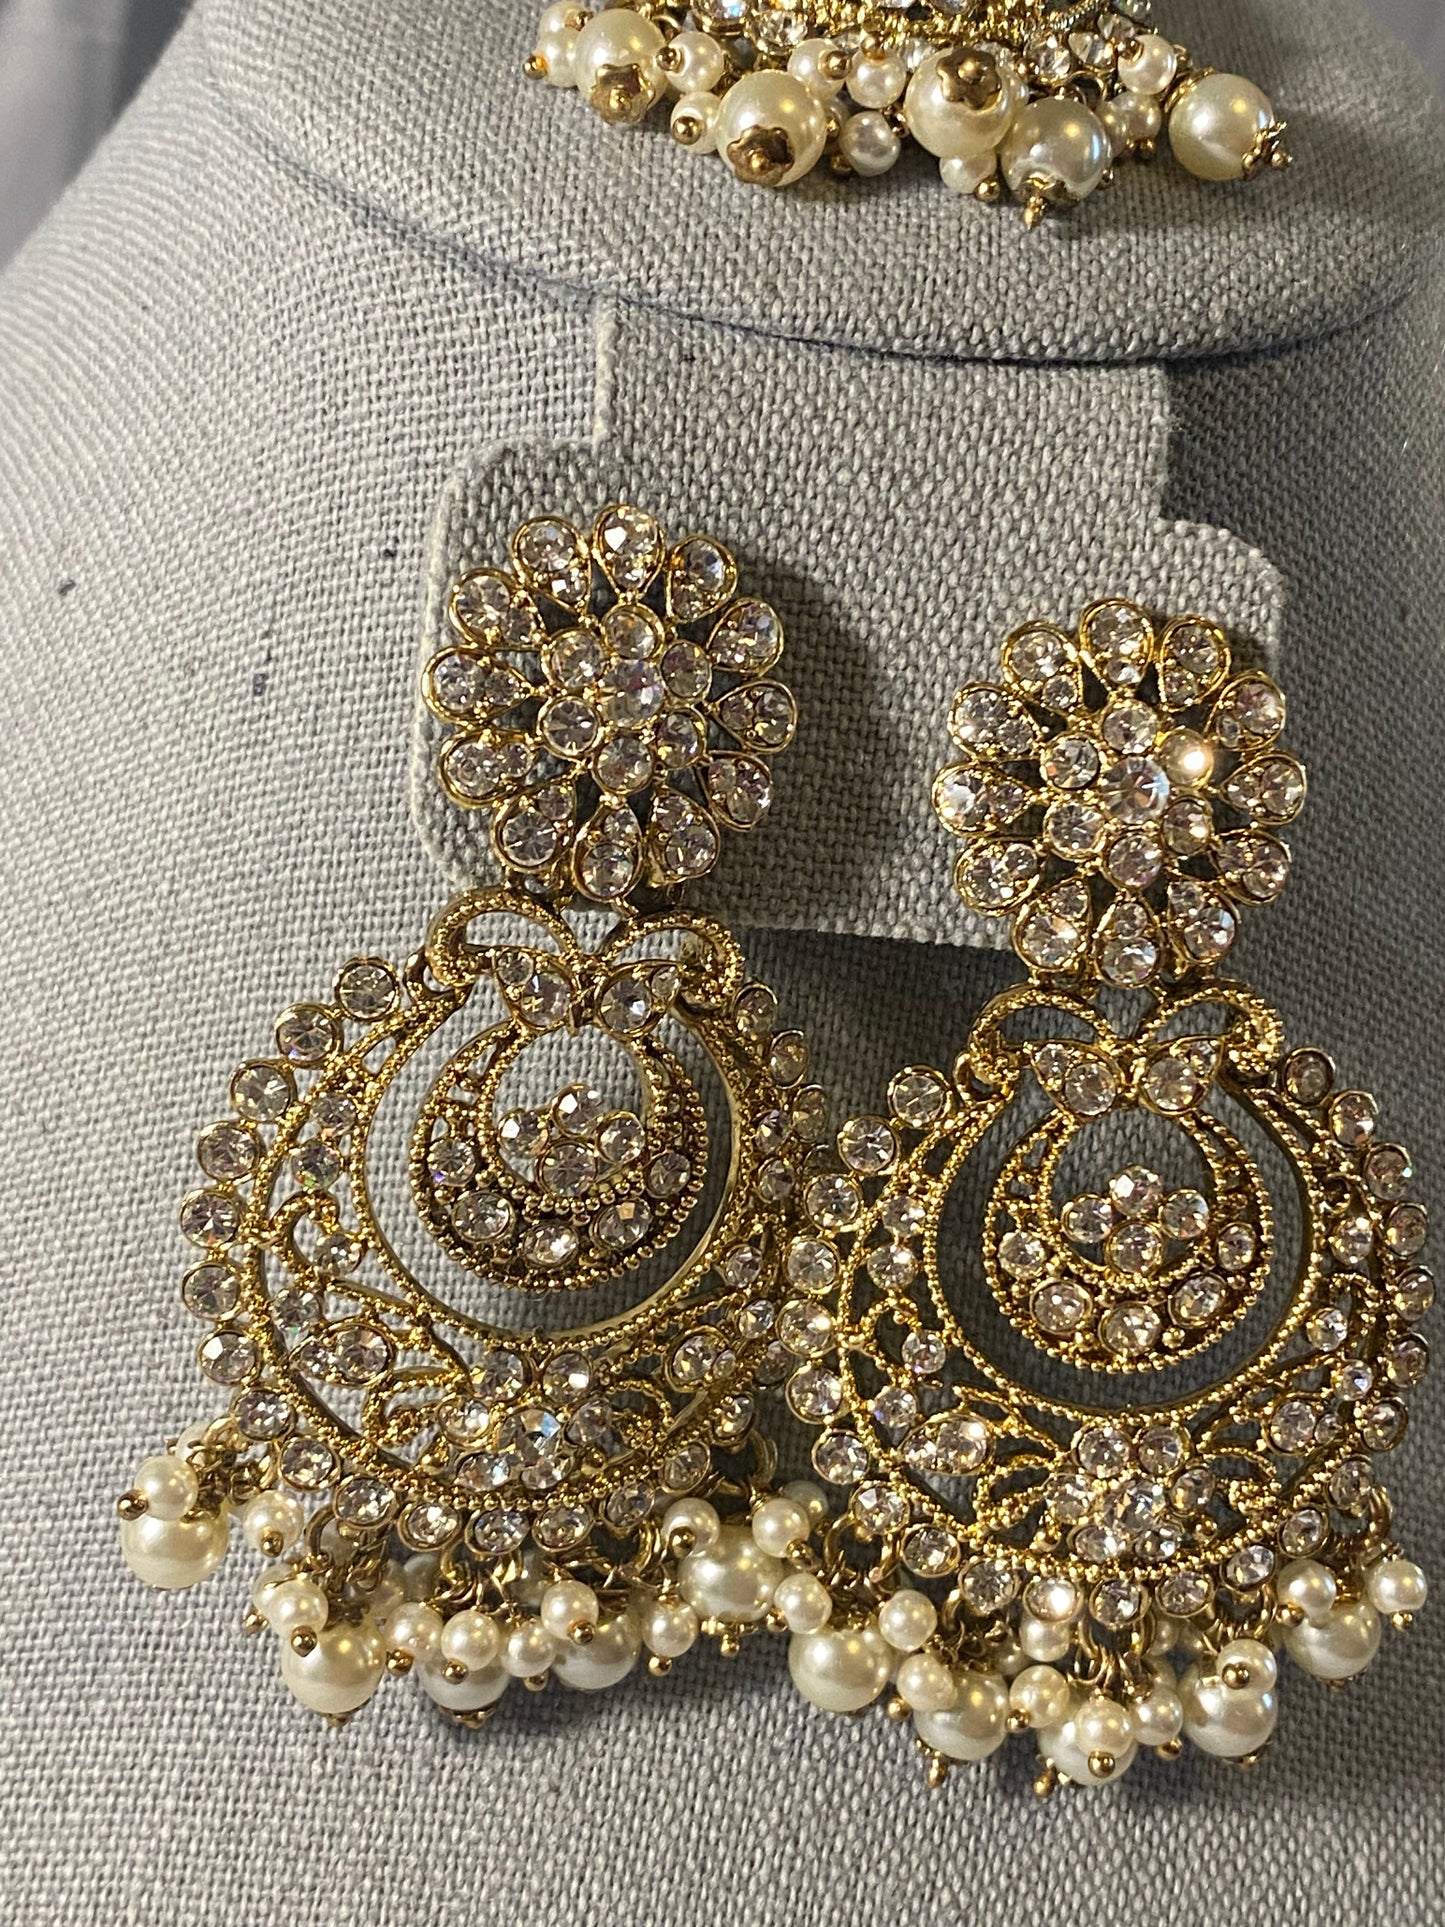 New Jewelry: 3 Piece Gold Plated Crystal Wedding Set